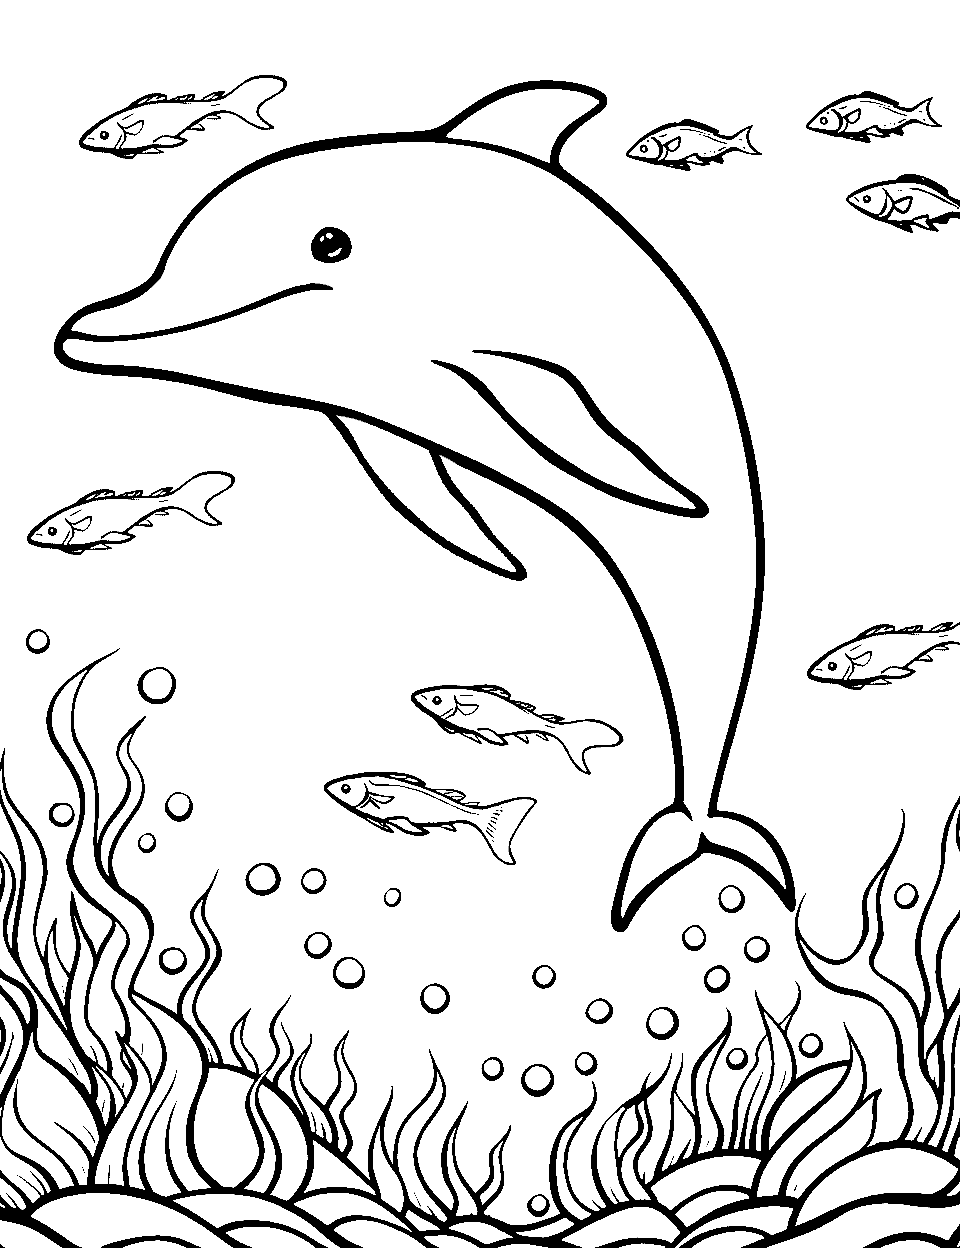 Ocean Explorer Dolphin Coloring Page - A dolphin navigating through a sea of gentle seaweed, creating a sense of ocean exploration.